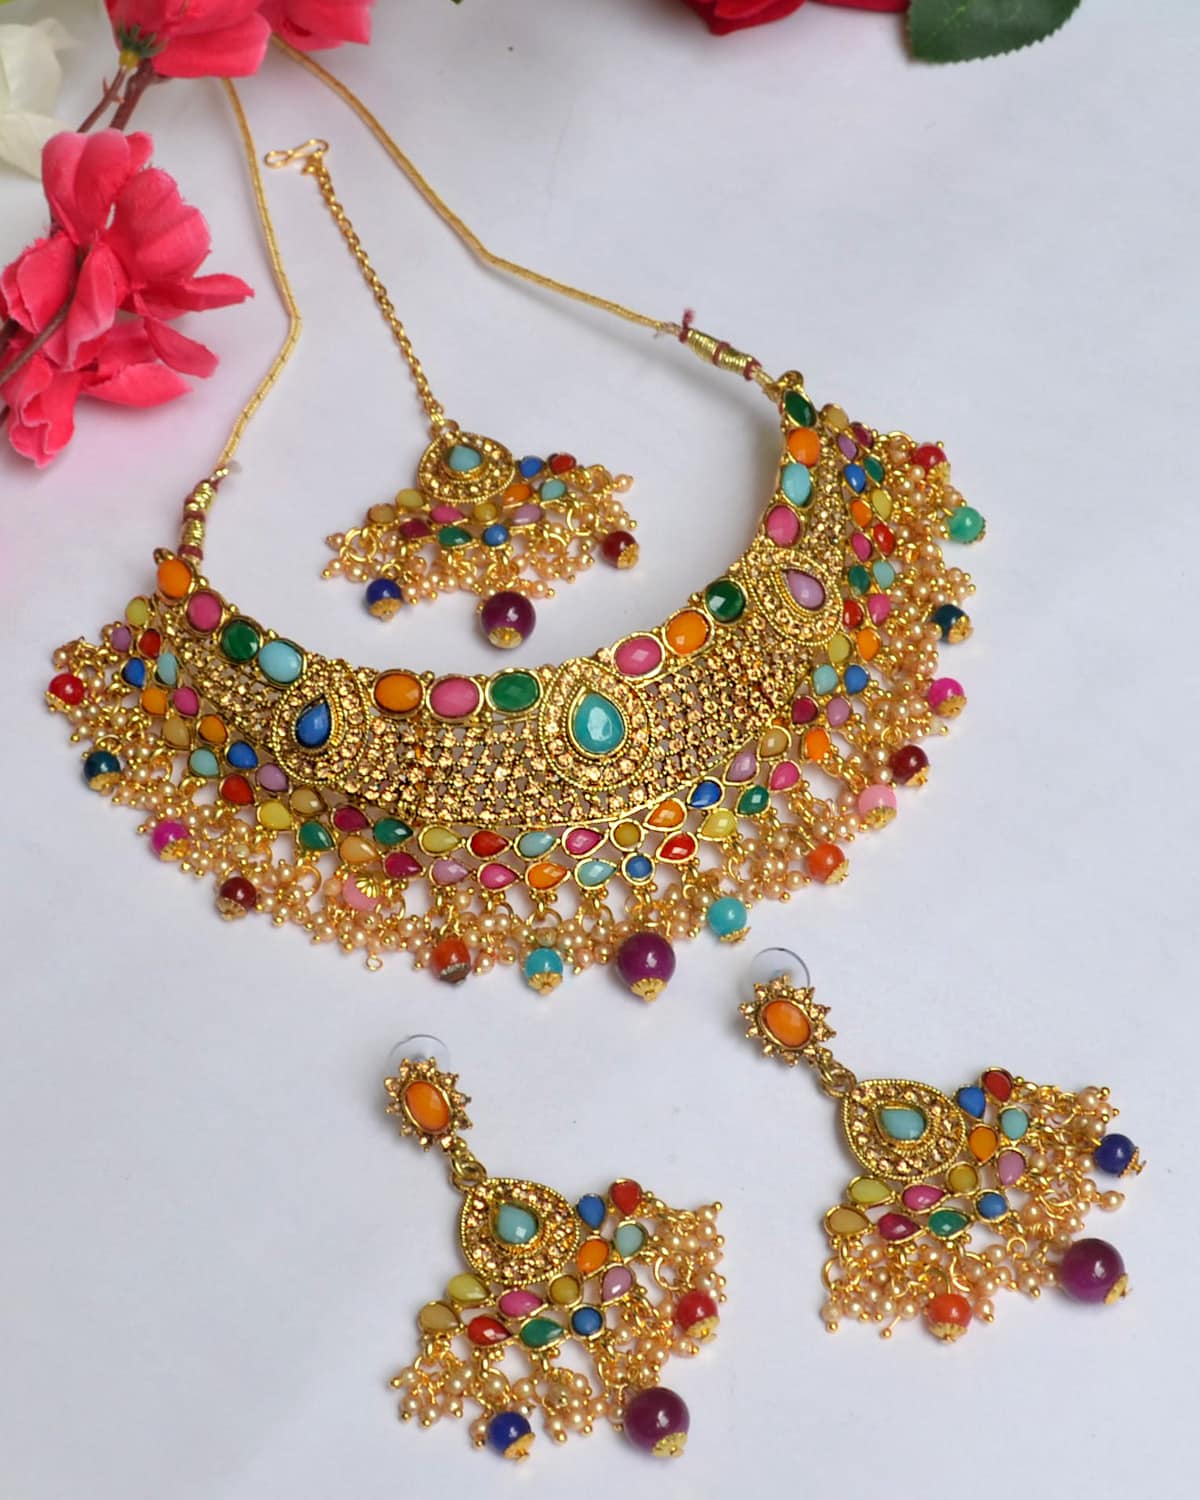 Shop Gold Tone Necklace Set Adorned with Multi Colored Stone | Indian Jewels